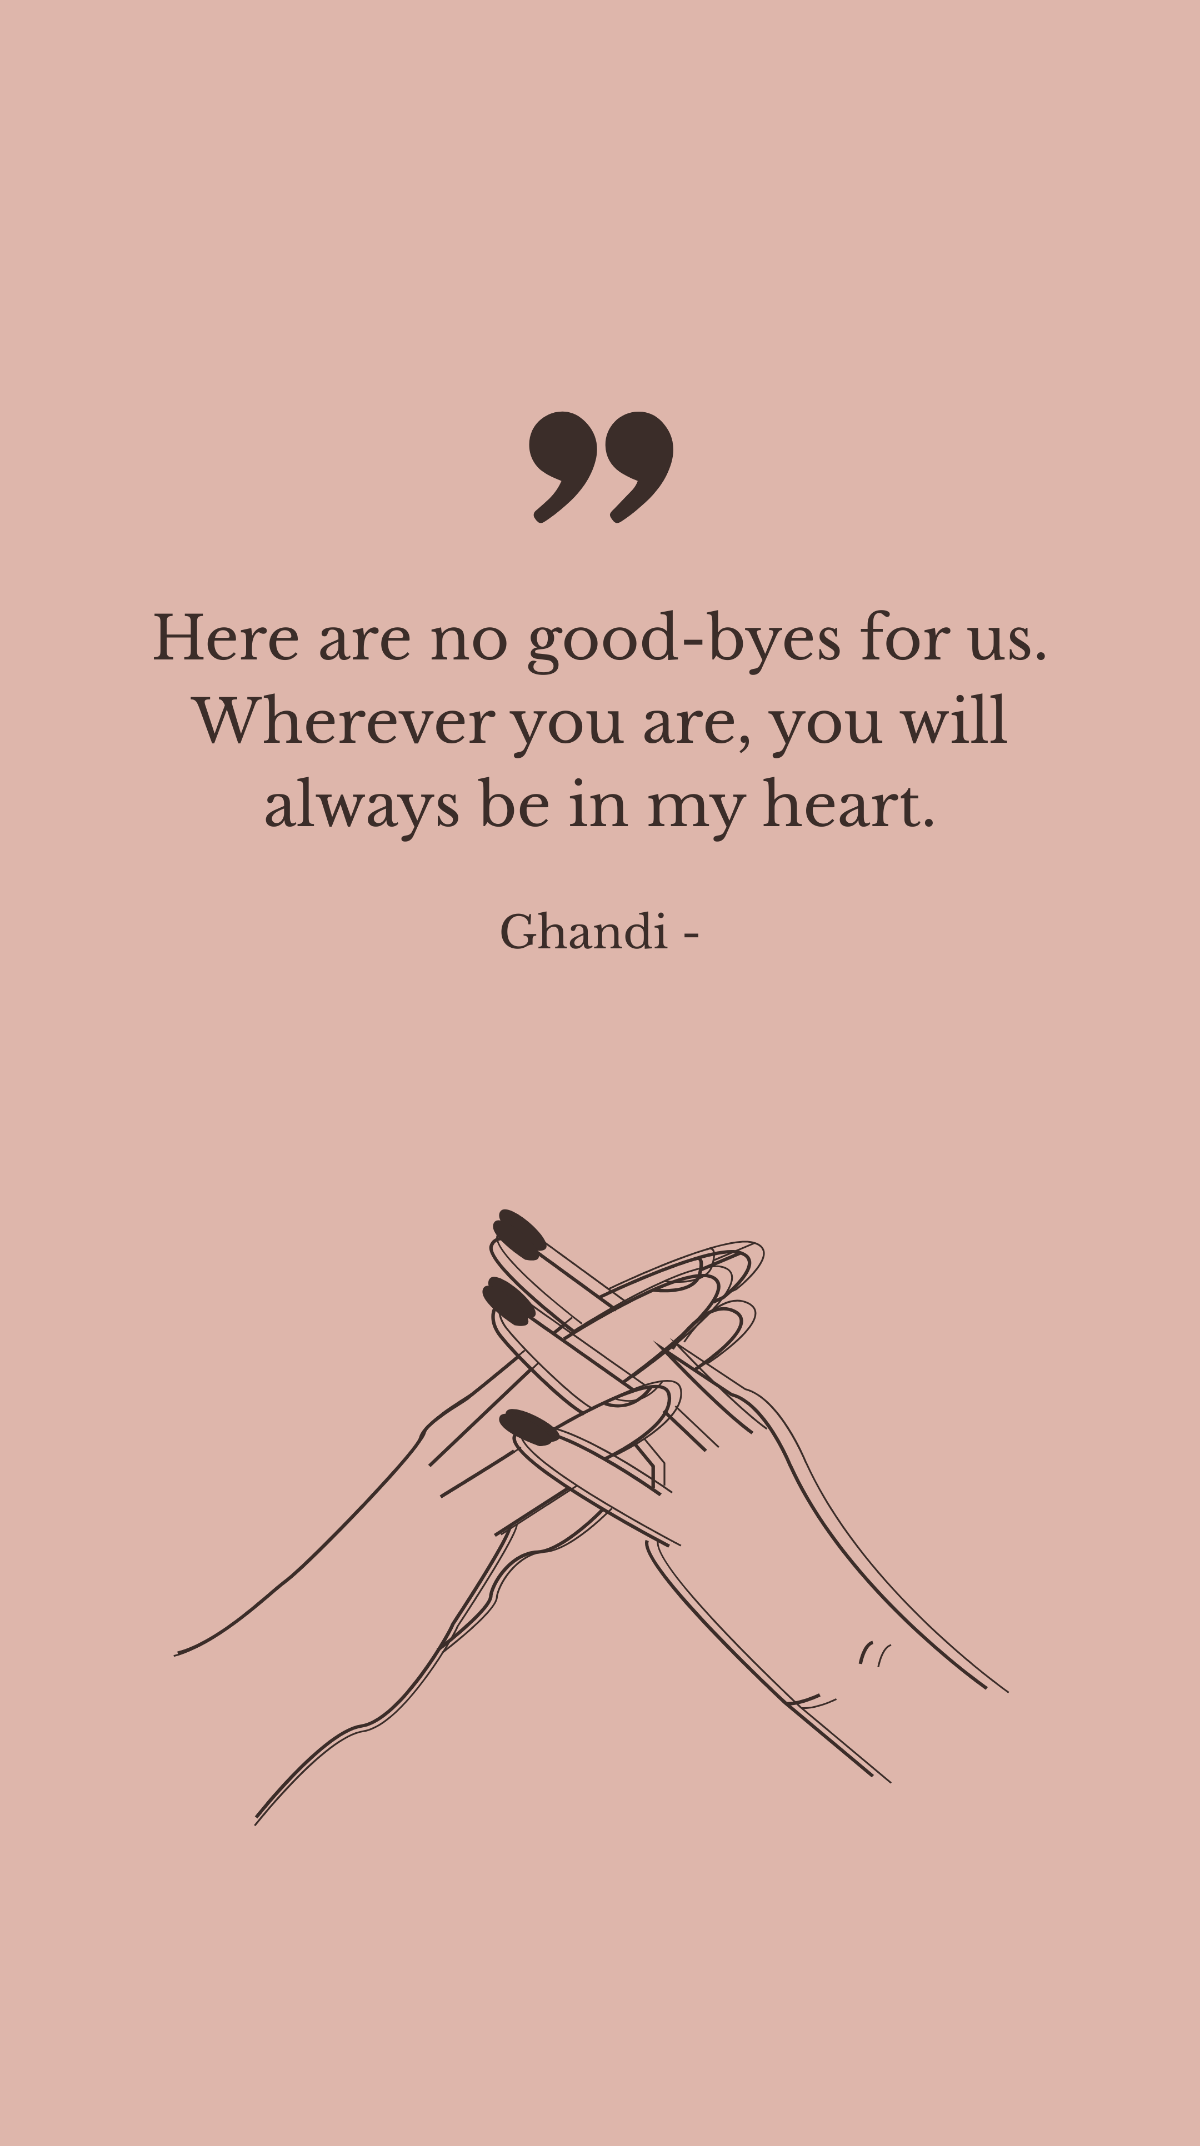 Free Ghandi - Here are no good-byes for us. Wherever you are, you will always be in my heart. Template